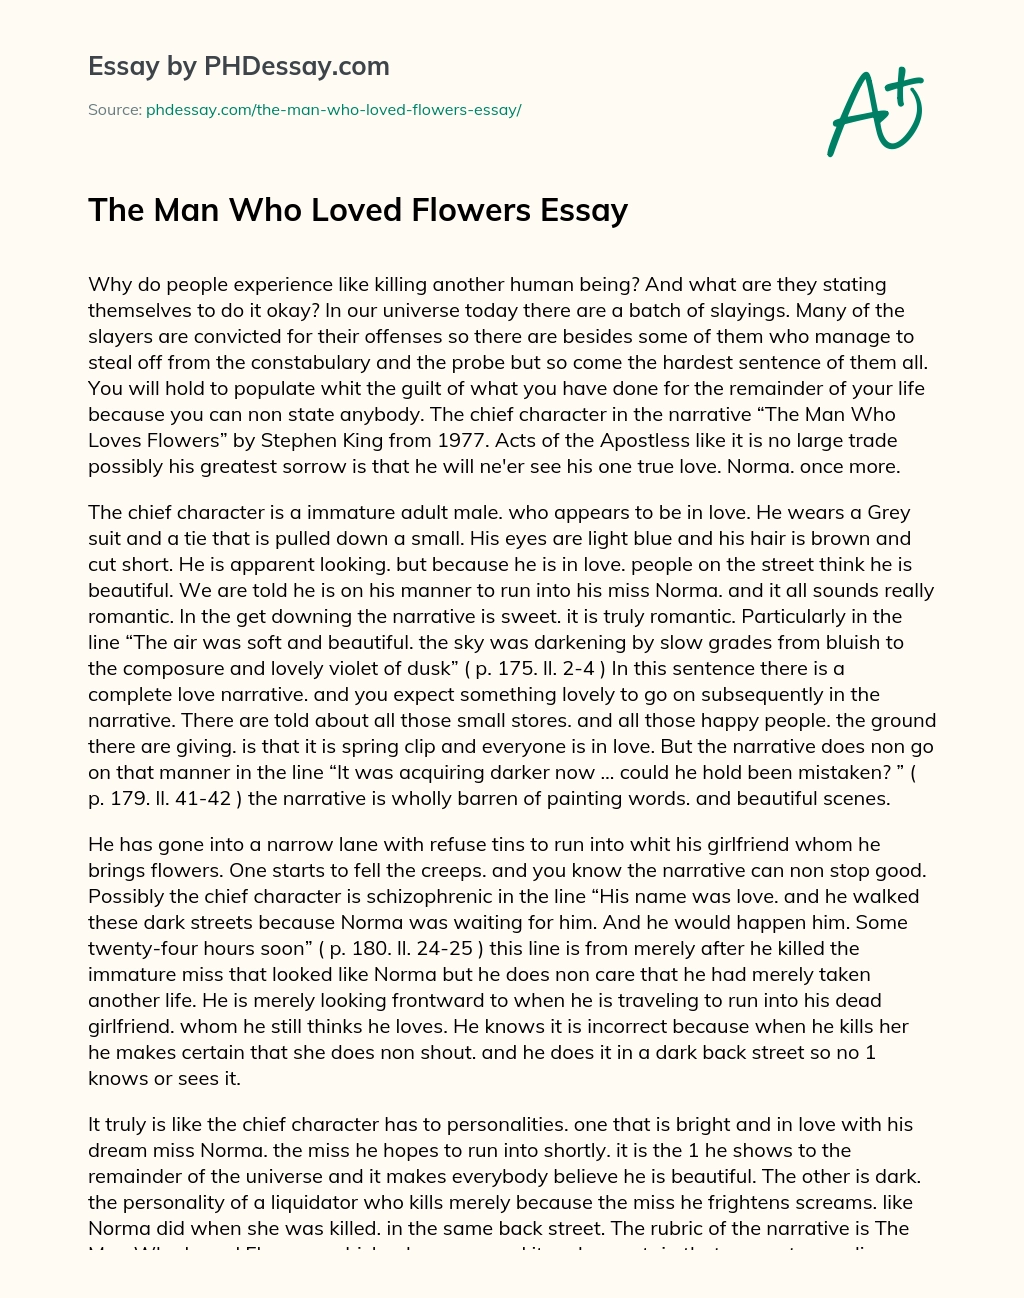 The Man Who Loved Flowers Essay essay